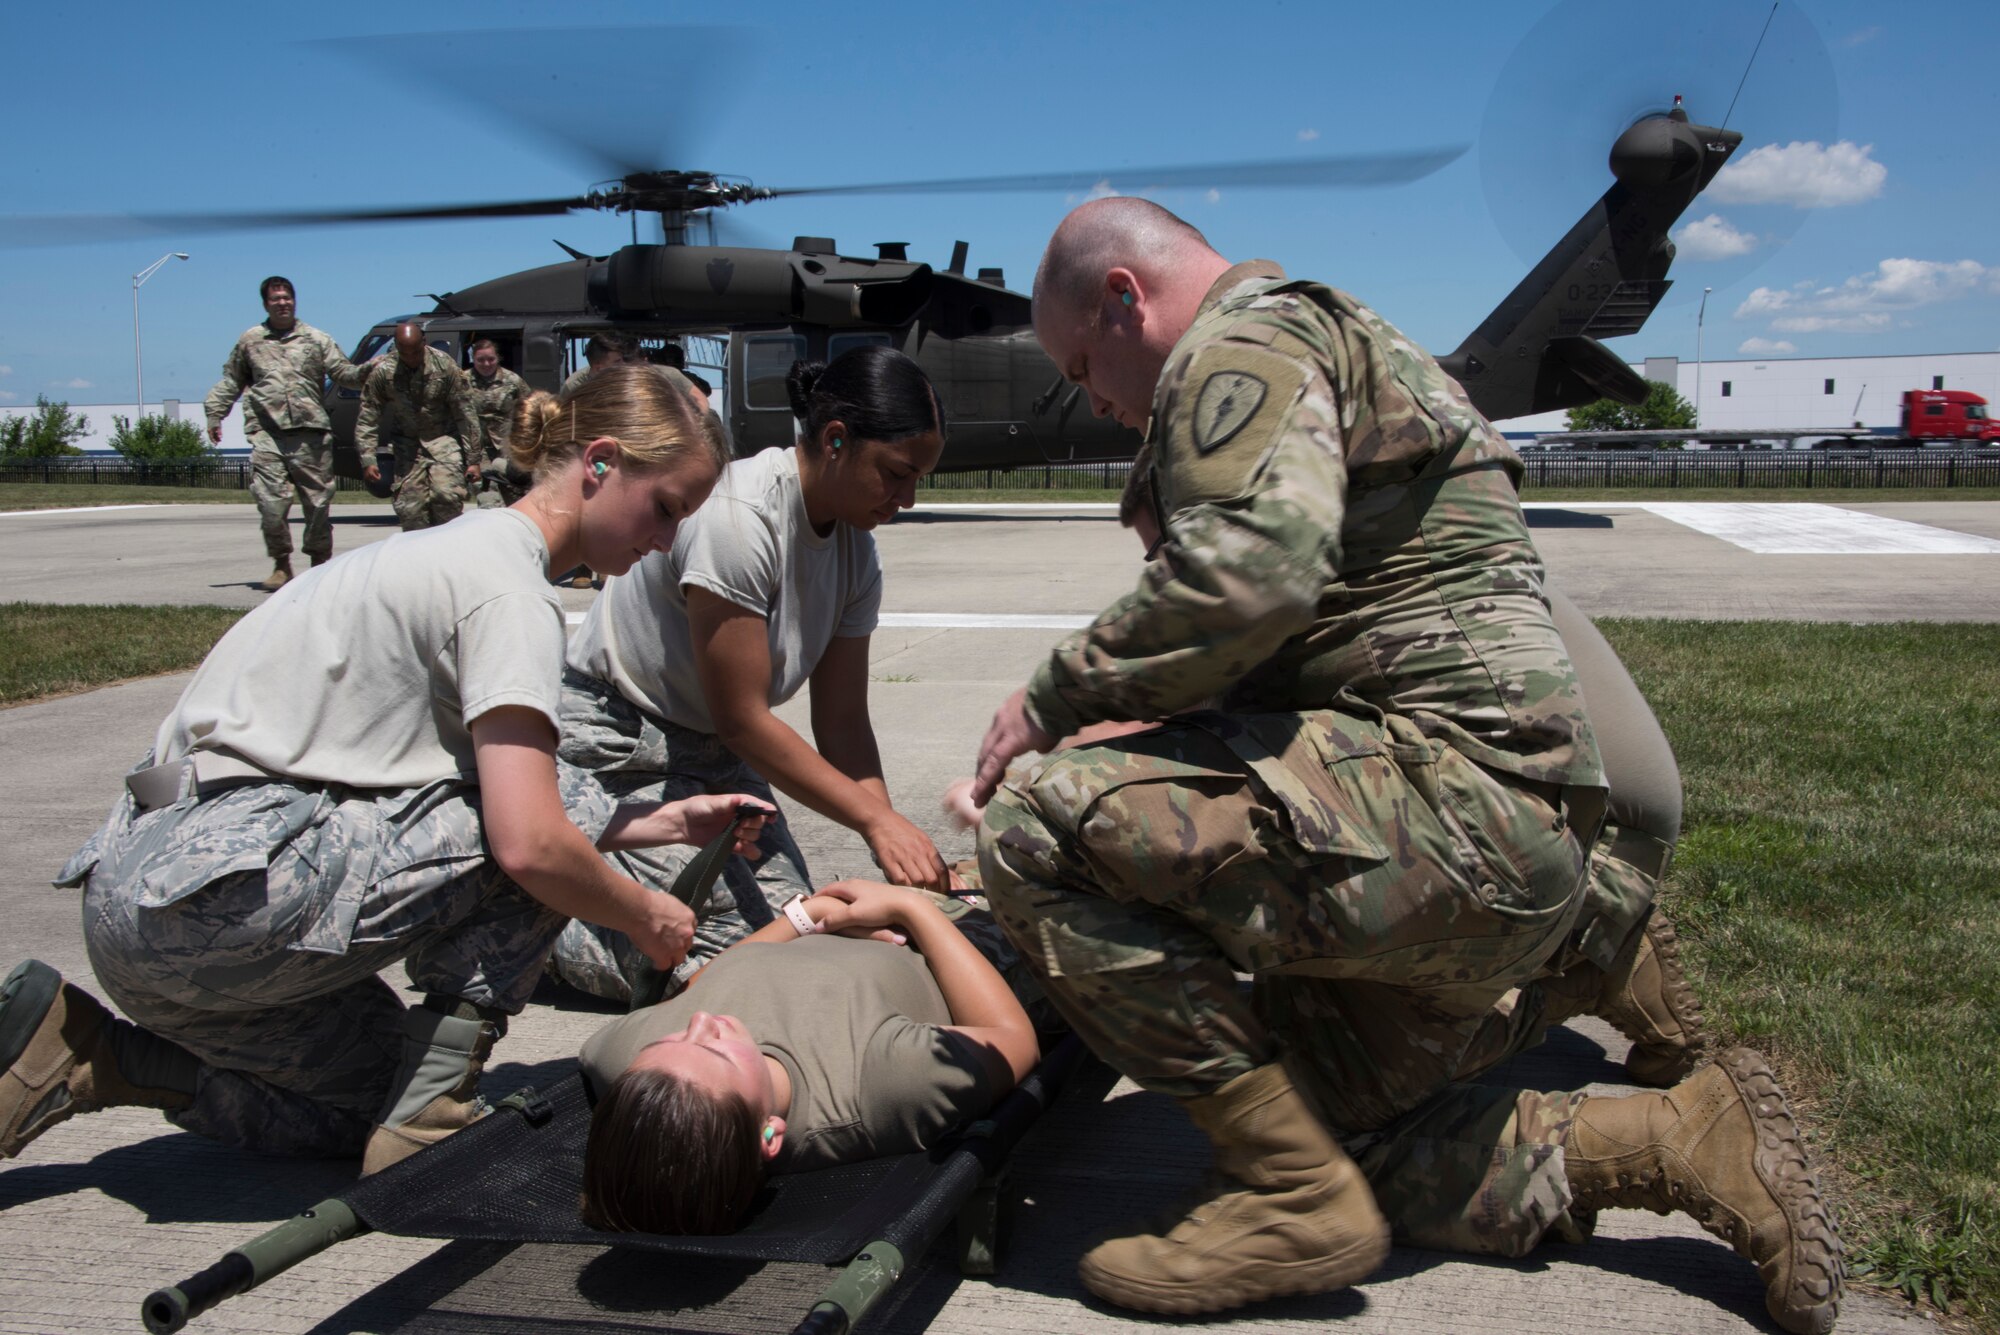 Airmen and Soldiers from the Indiana National Guard prepare to load a patient into a UH-60 Black Hawk helicopter during a medical transport exercise at the Johnson County Armory in Franklin July 2, 2020. Due to propeller wash, service members did not wear masks for safety reasons as the masks could cause debris interfering with helicopter propellers.